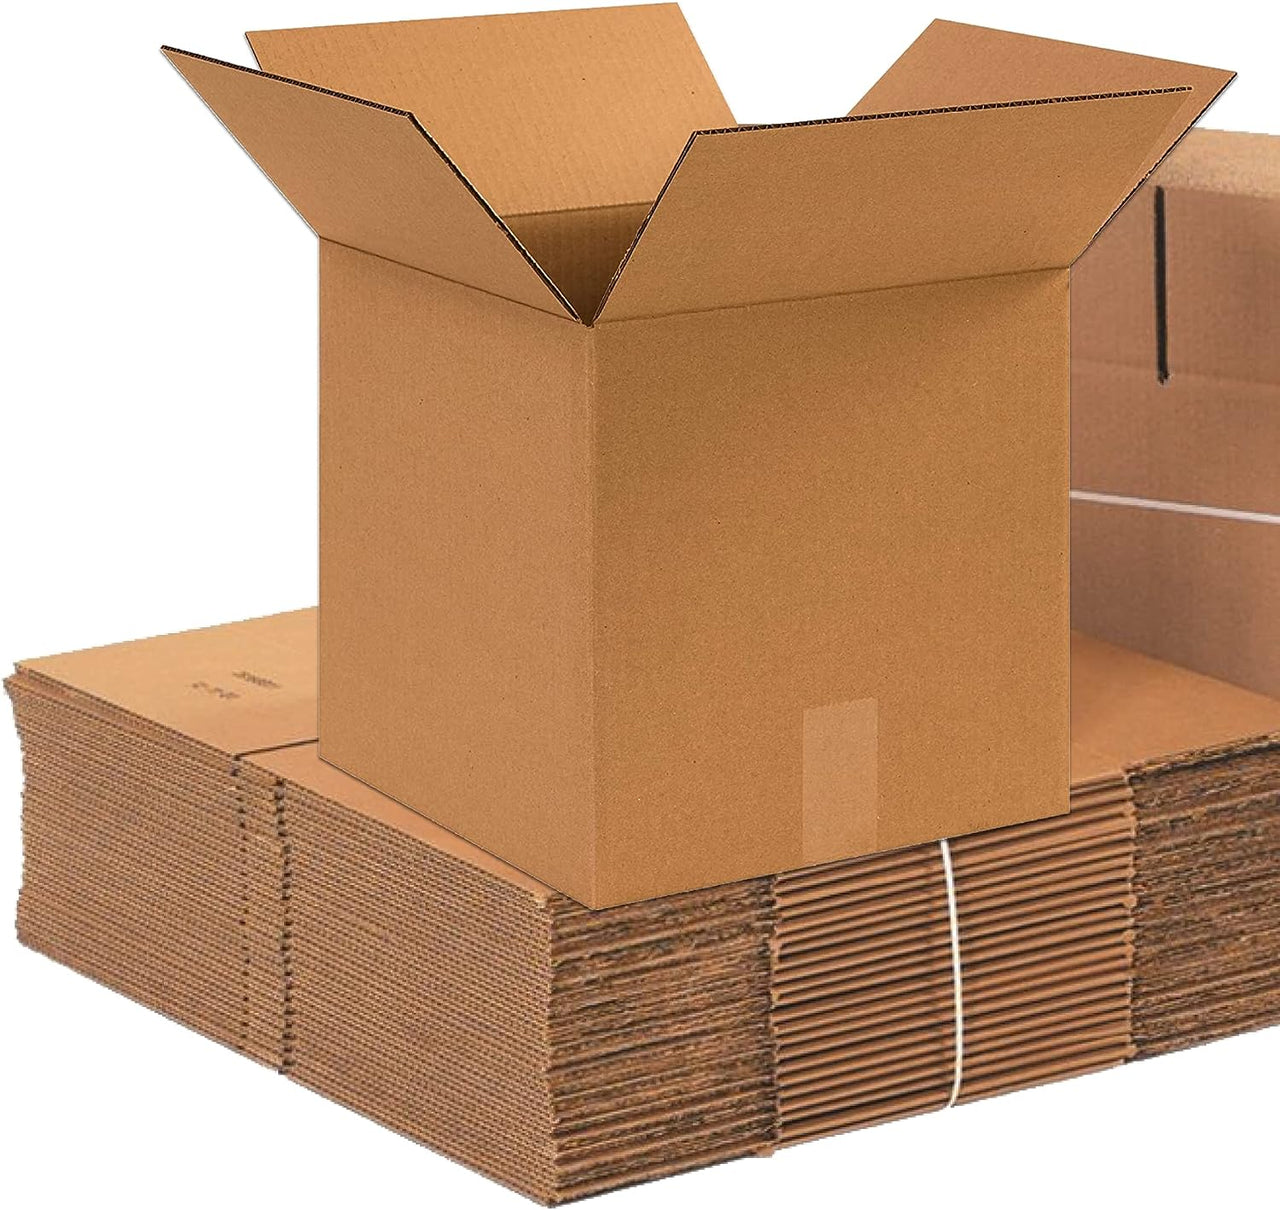 Shipping Boxes 20"L x 20"W x 20"H 10-Pack Corrugated Cardboard Box for Packing Moving Storage